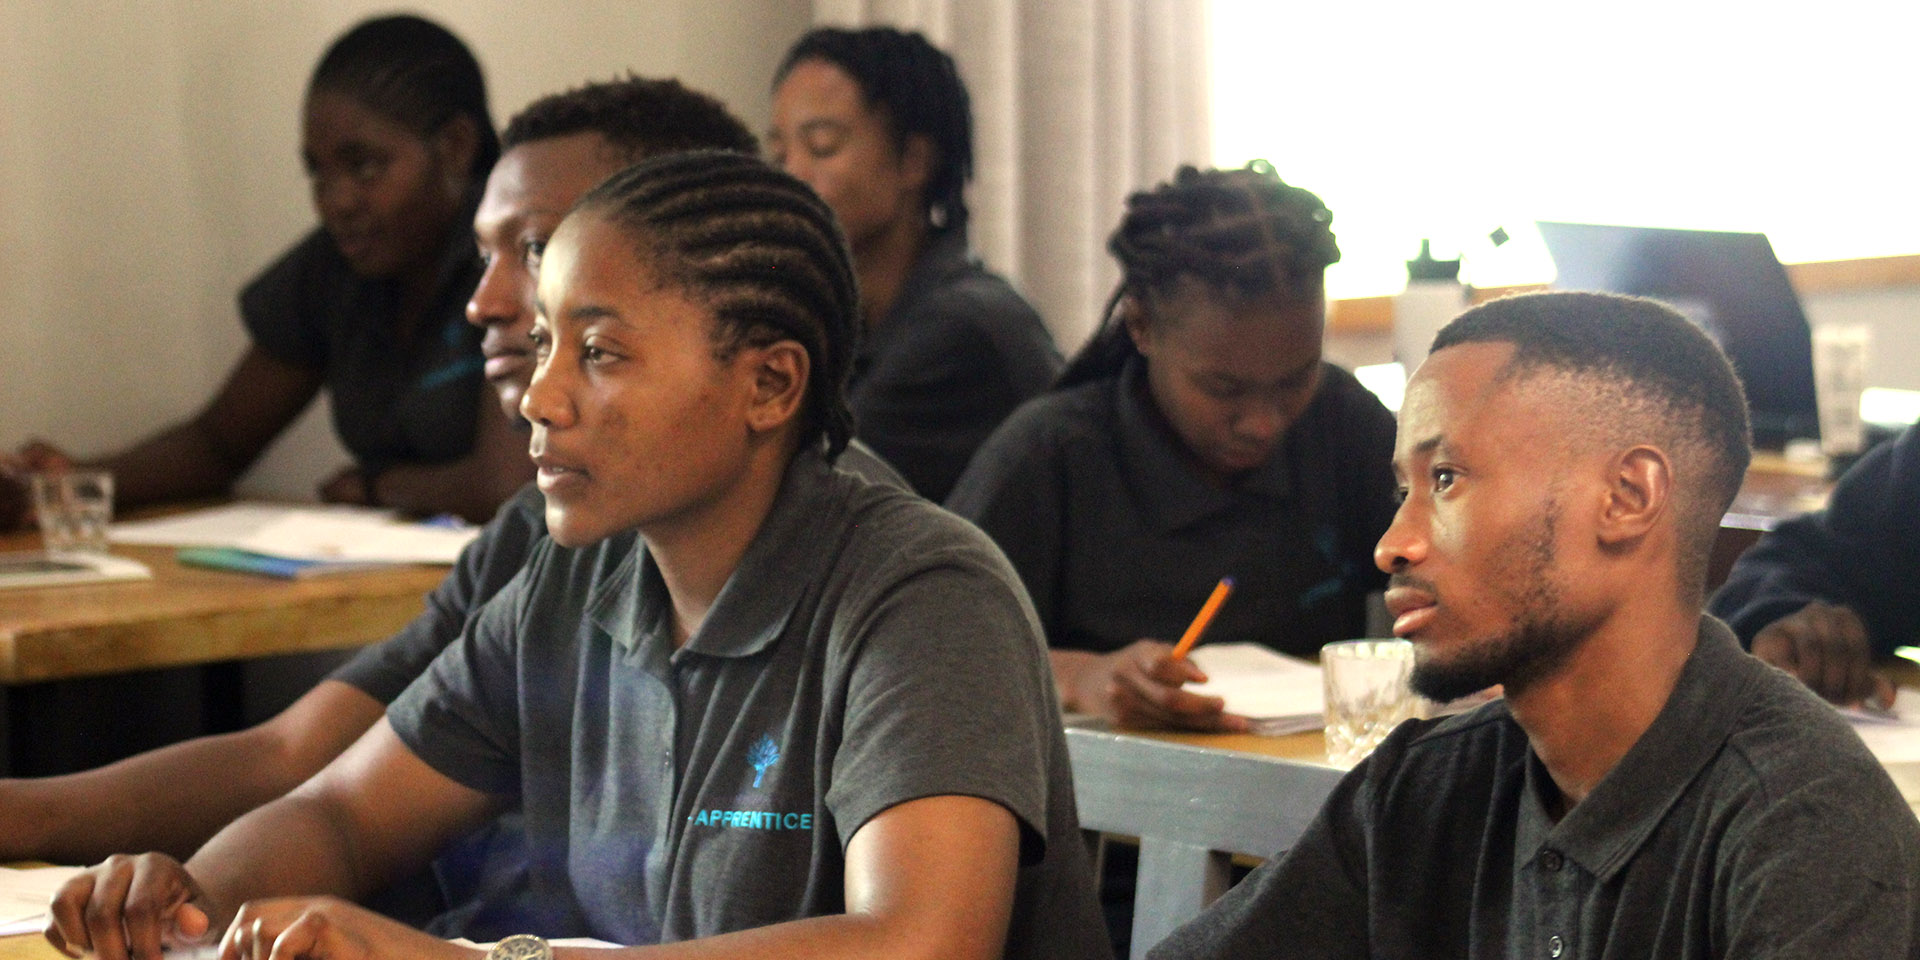 Adult learners in Namibia